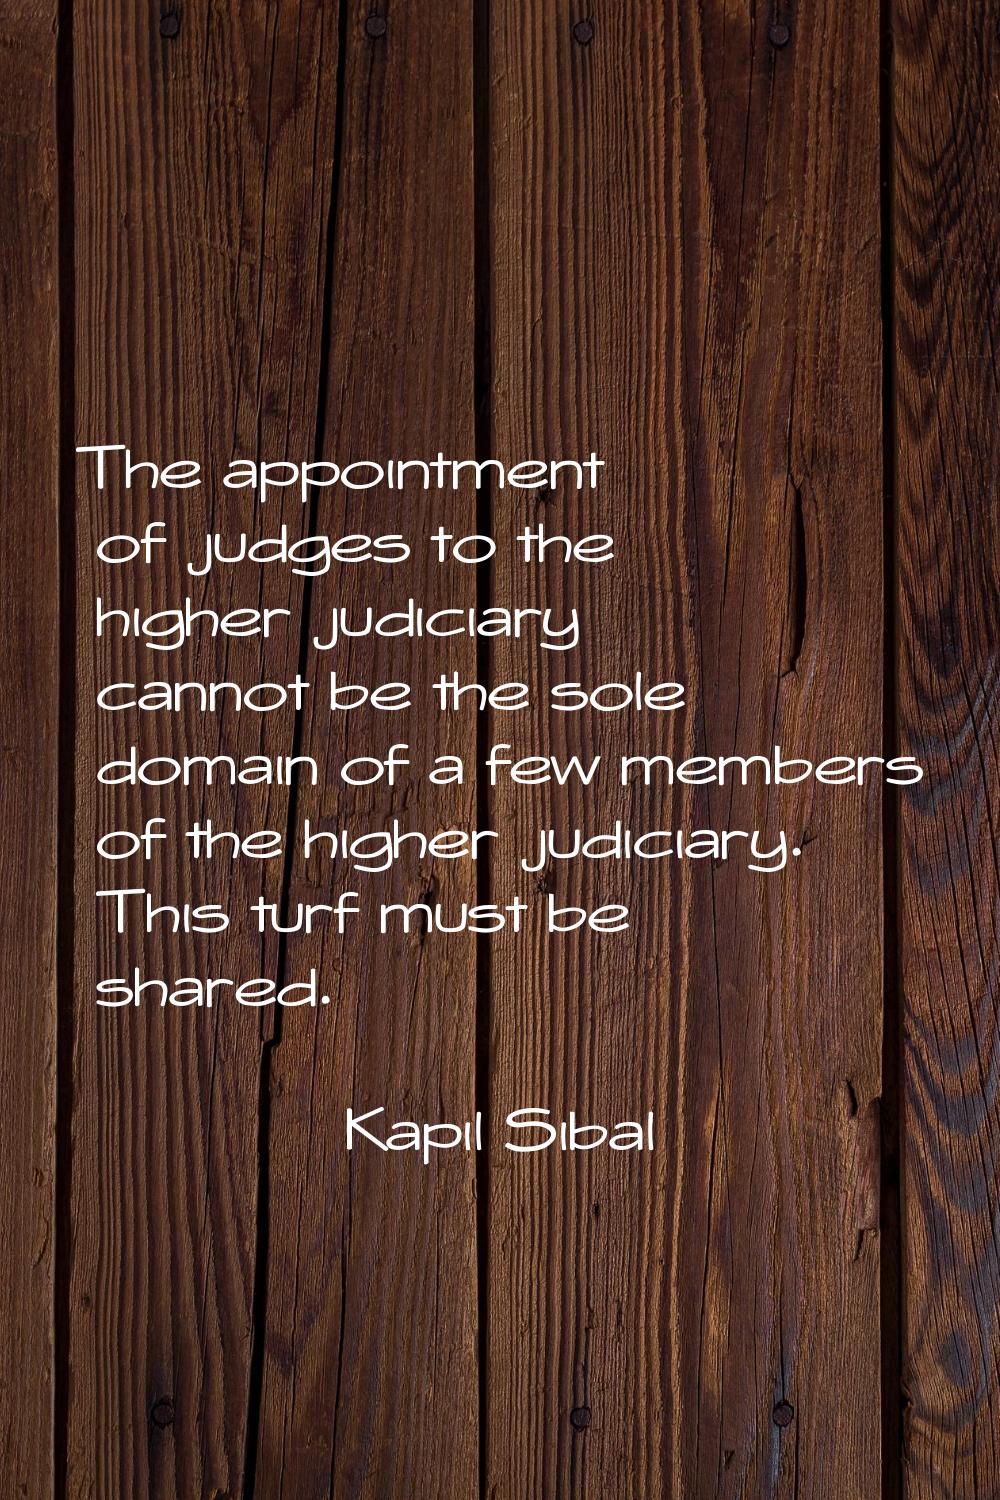 The appointment of judges to the higher judiciary cannot be the sole domain of a few members of the